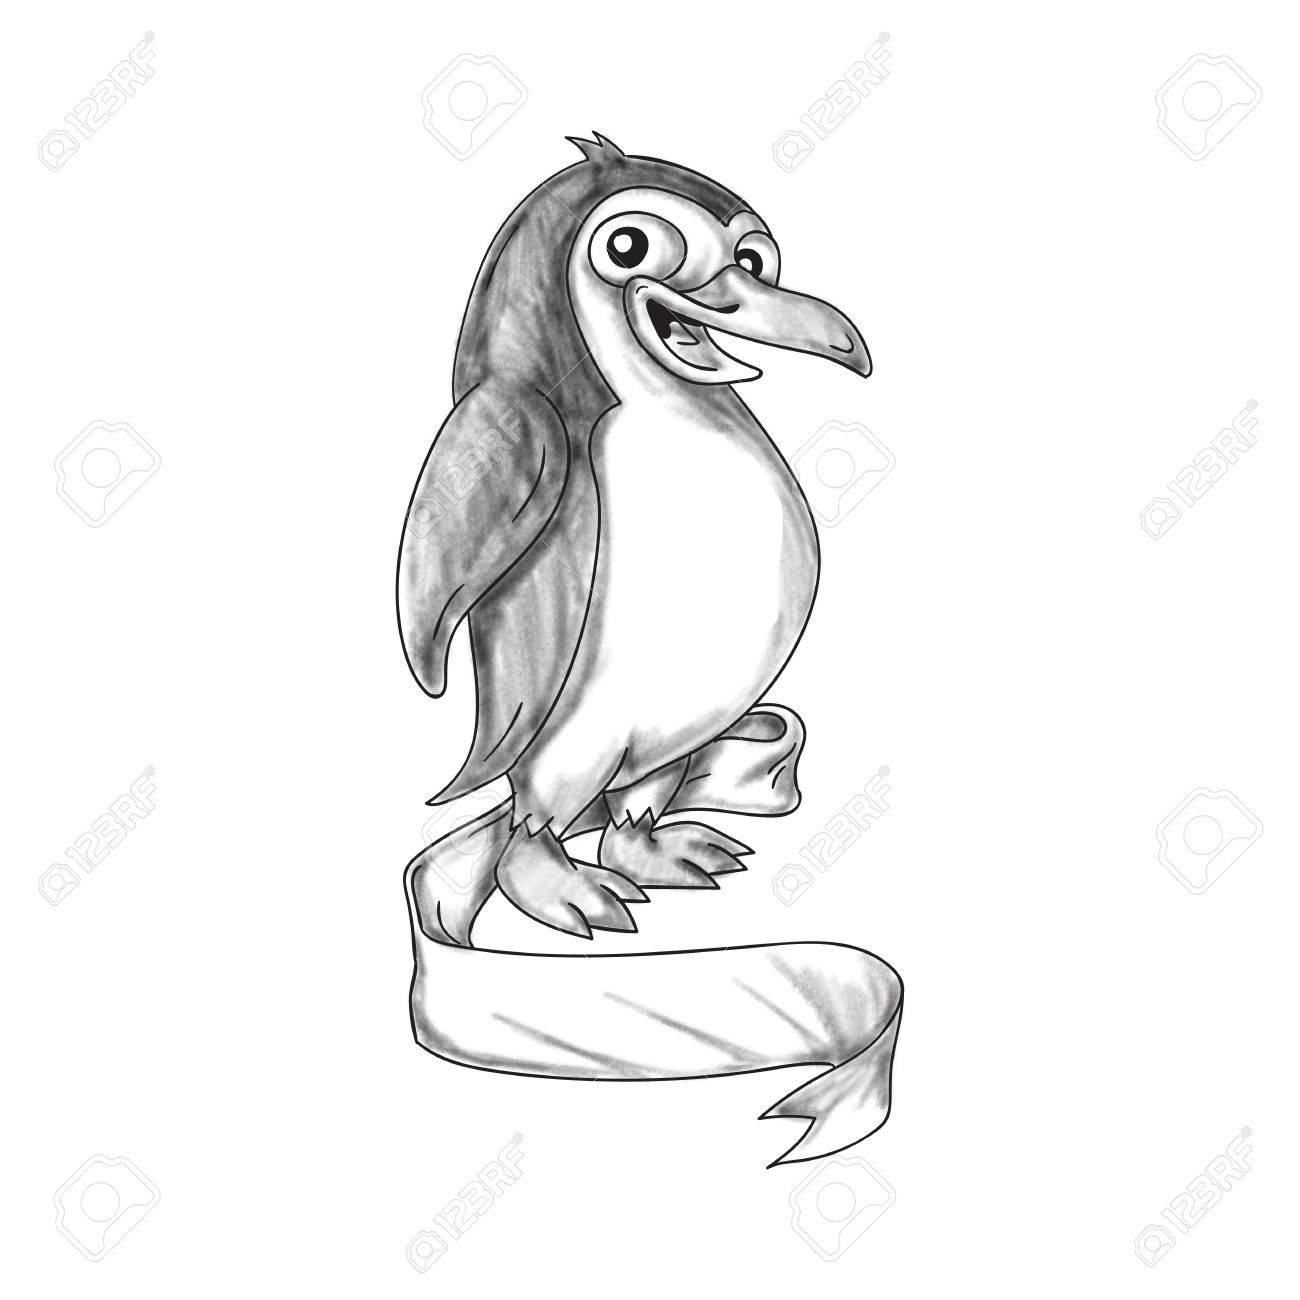 Tattoo Style Illustration Of A Penguin An Aquatic Flightless pertaining to dimensions 1300 X 1300